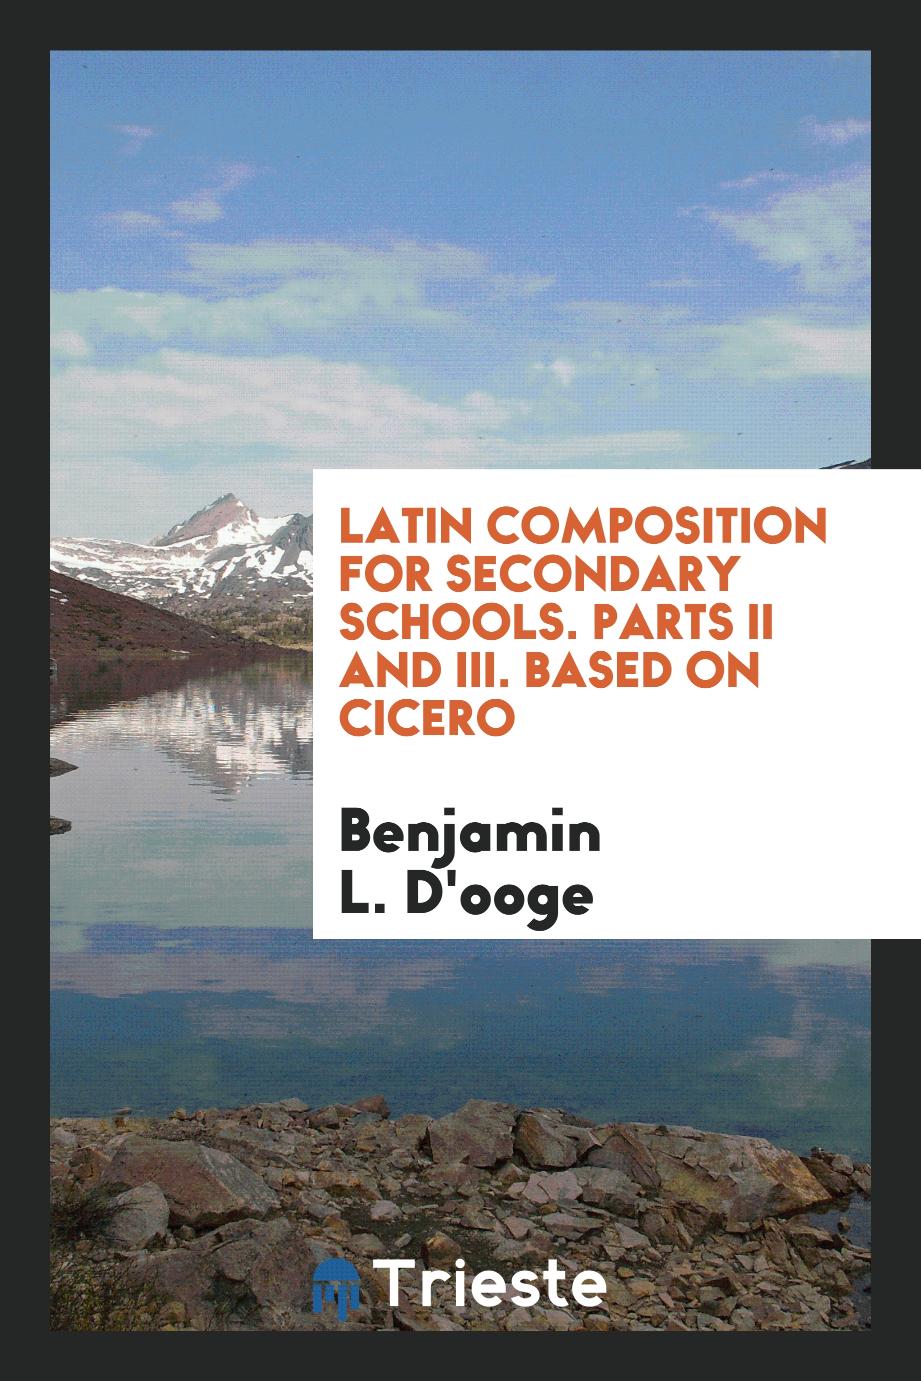 Latin Composition for Secondary Schools. Parts II and III. Based on Cicero